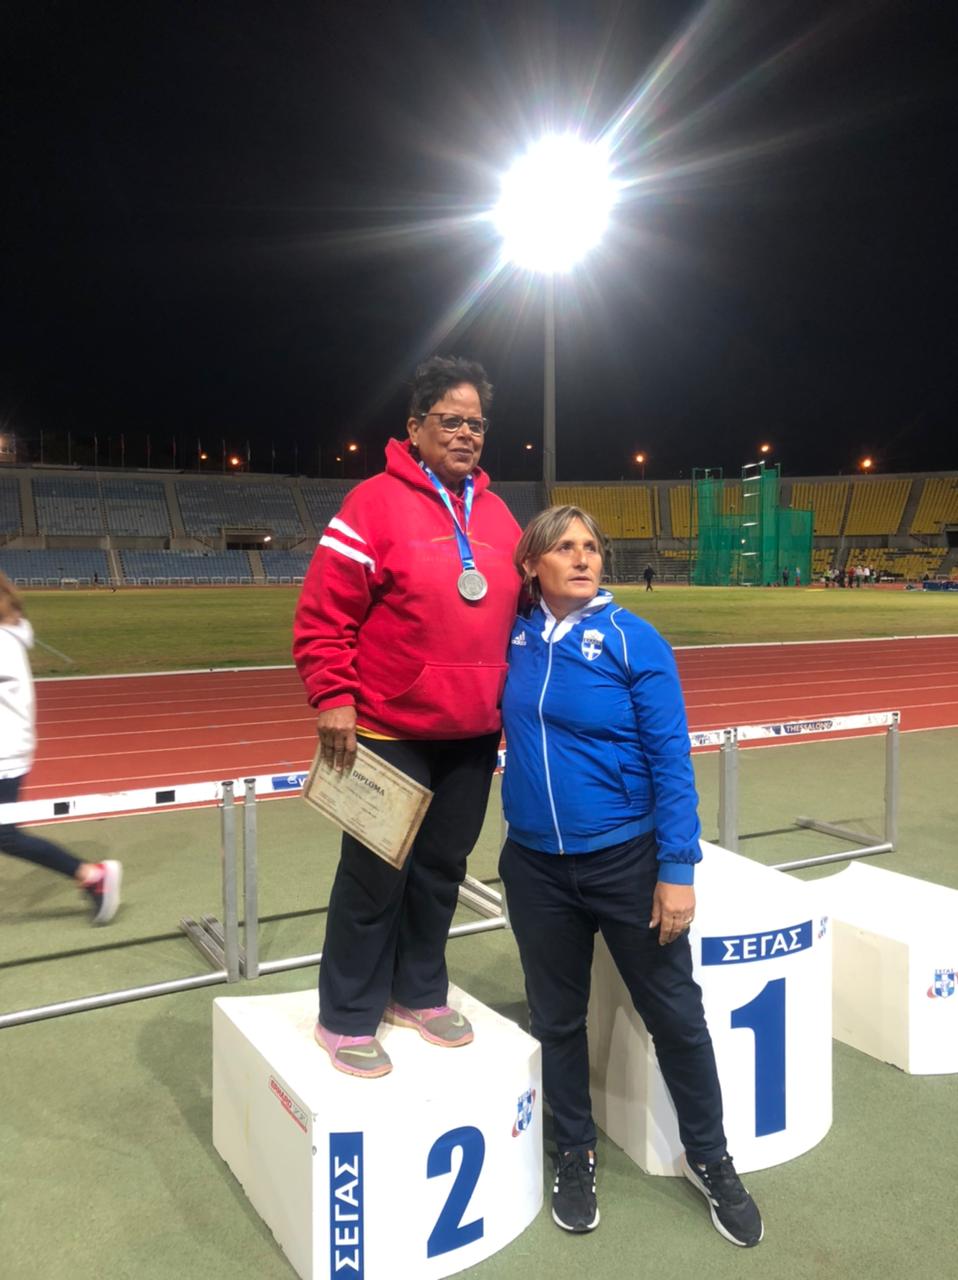 Veteran Athletes from Goa participated in an Int. Athletic Meet in Thessaloniki in Sep2022.